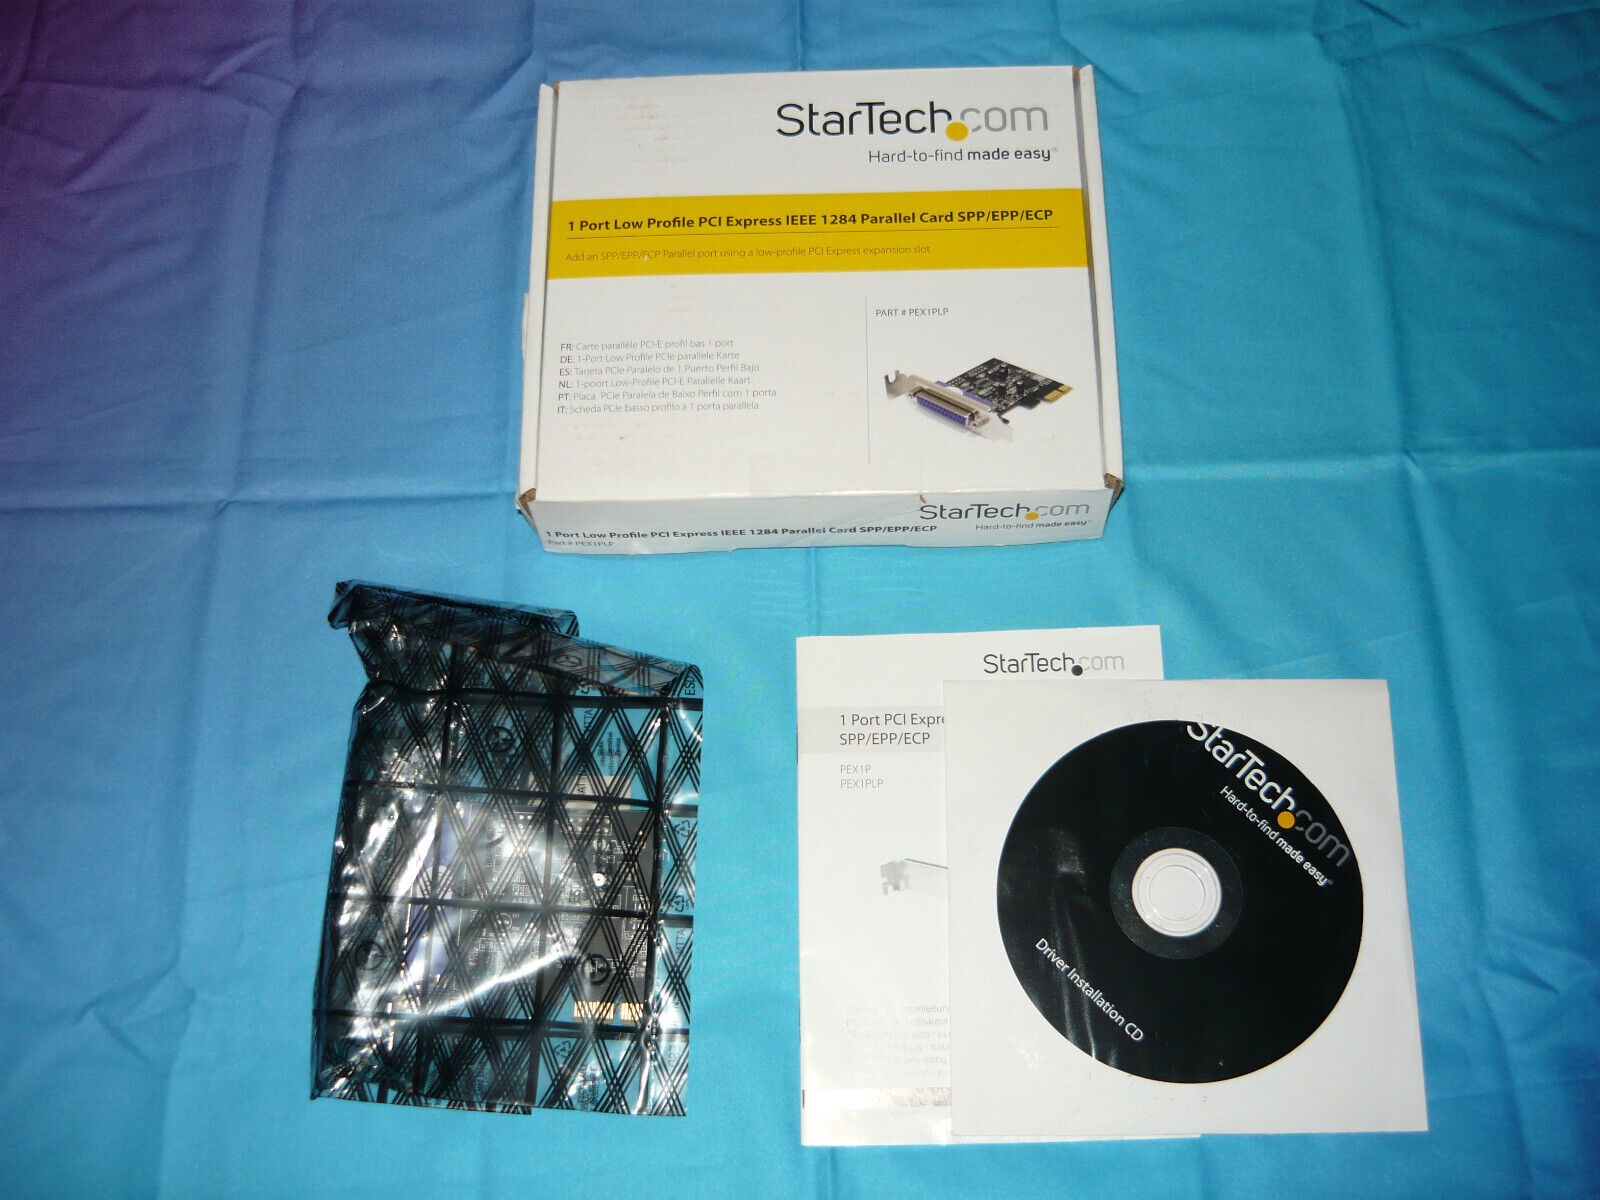 New StarTech PEX1PLP Low Profile PCI Express IEEE 1284 Parallel Card Open Box